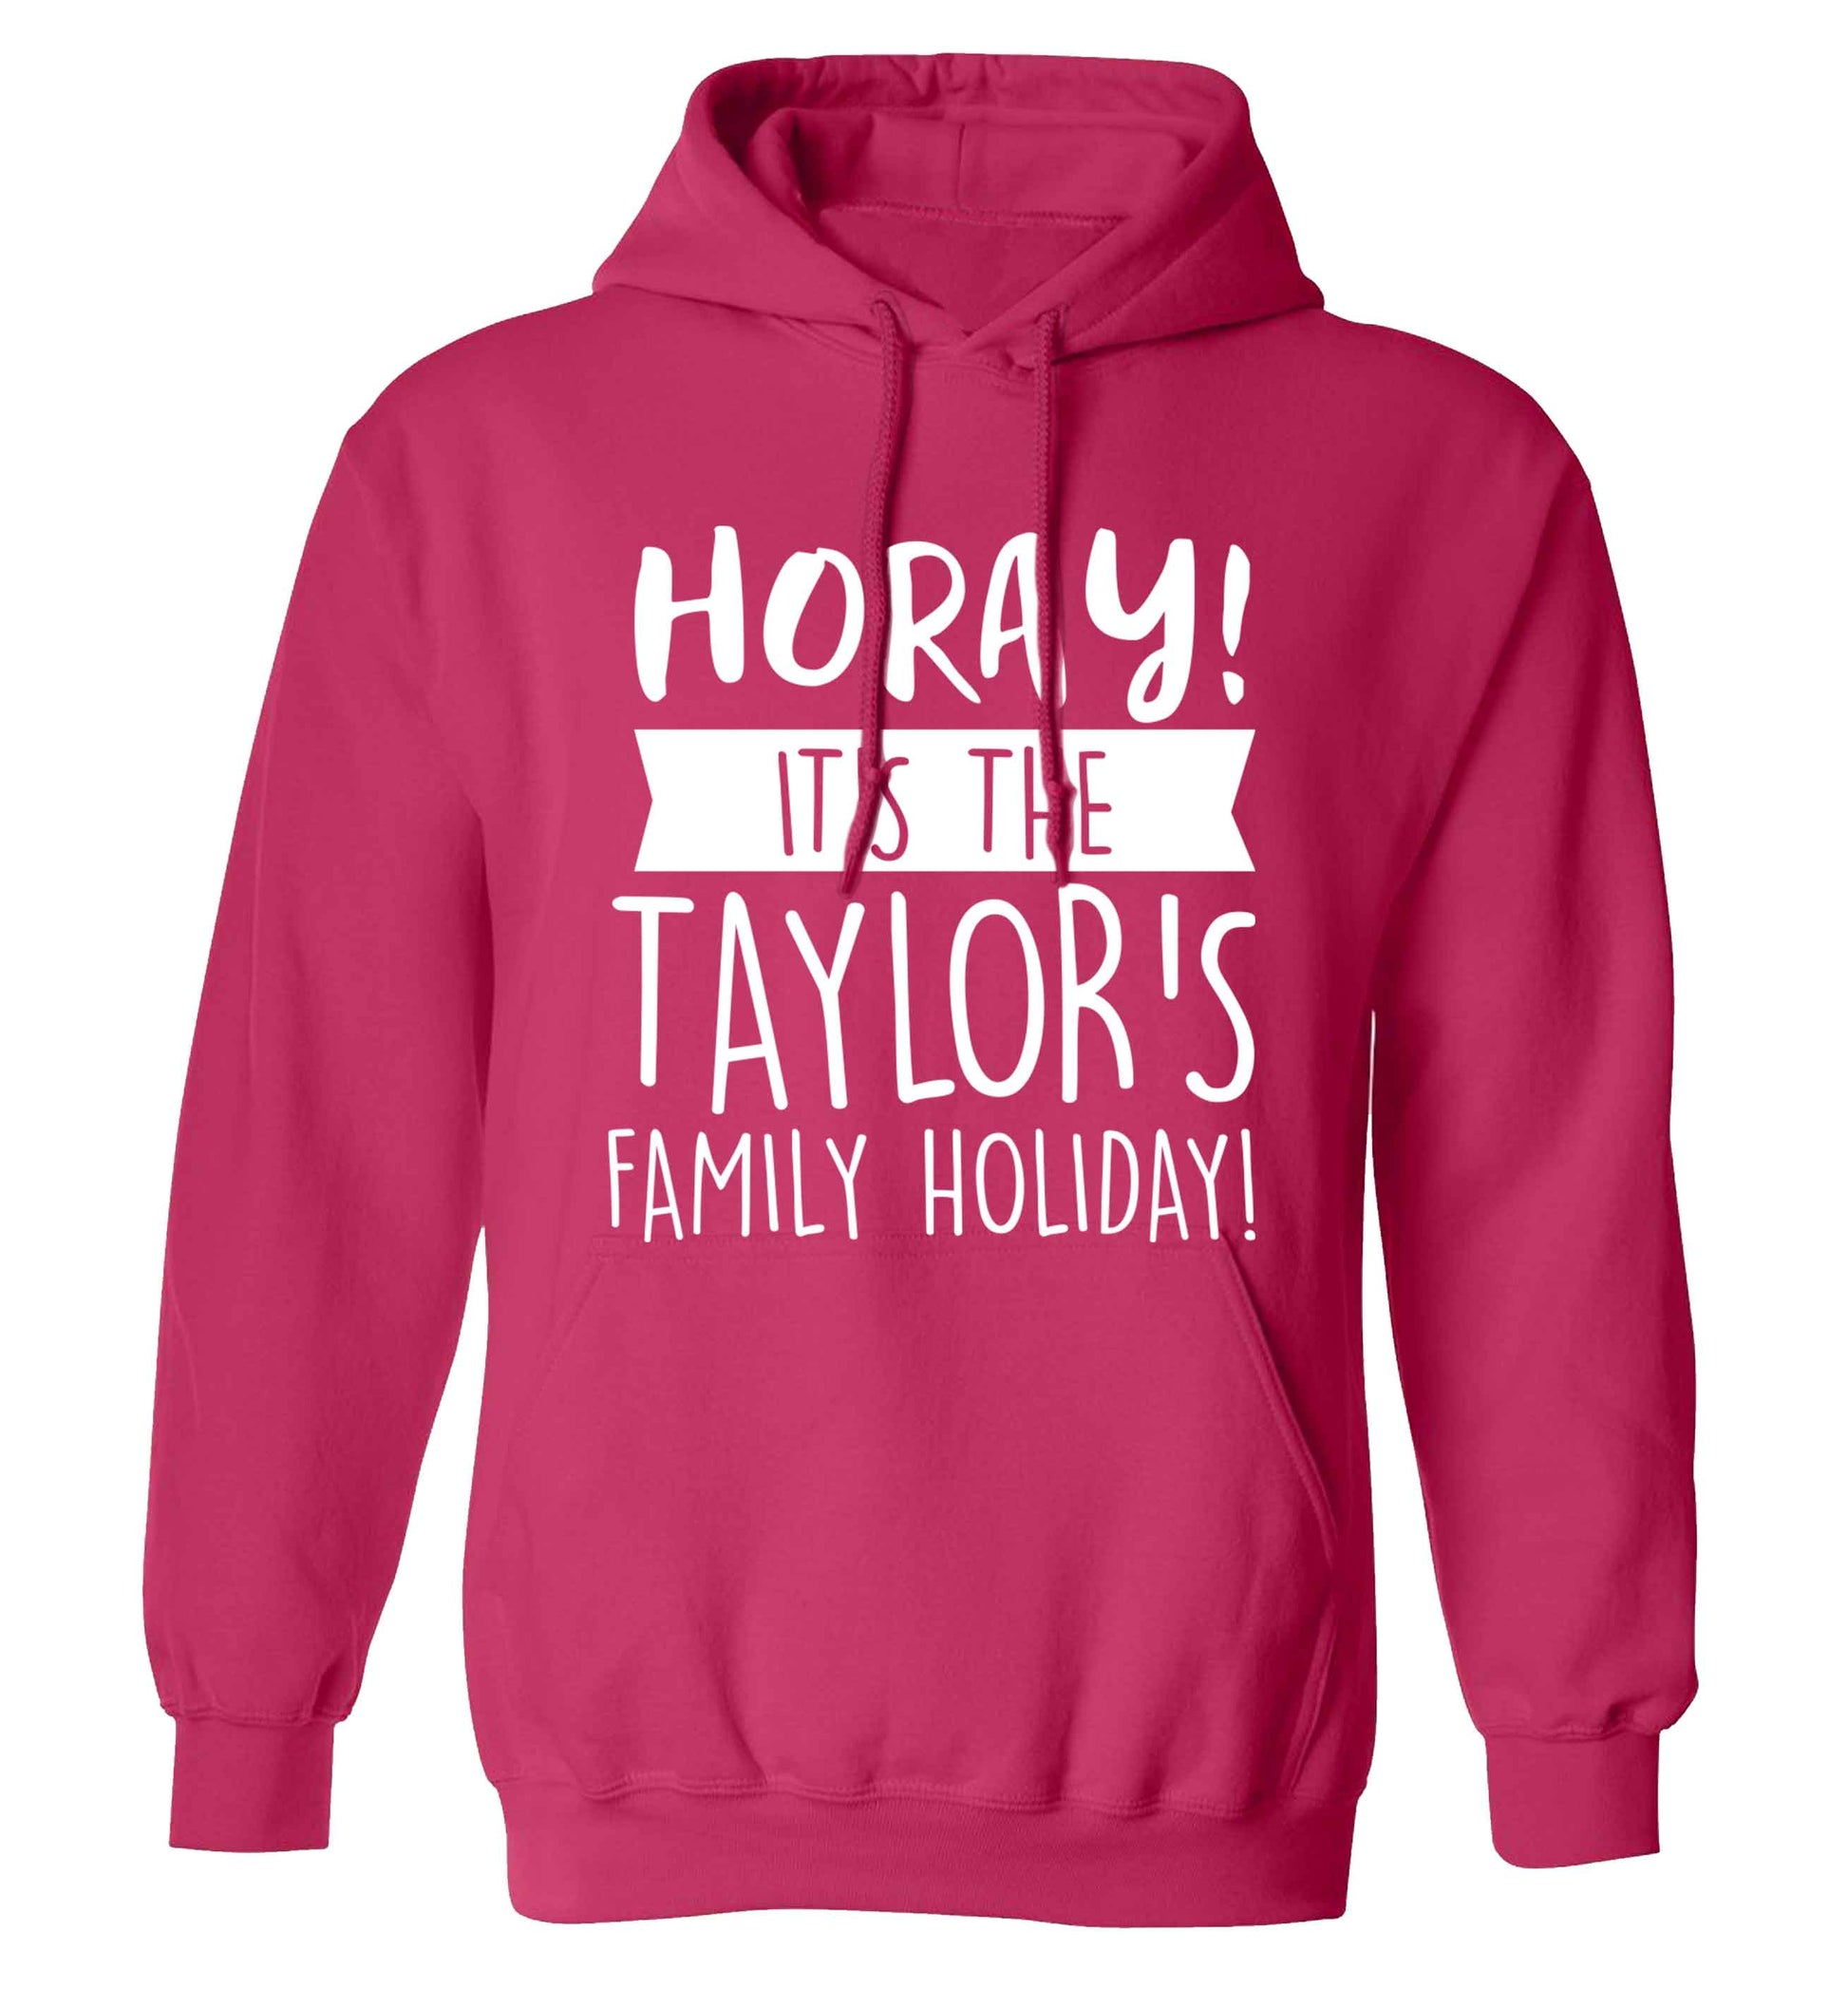 Horay it's the Taylor's family holiday! personalised item adults unisex pink hoodie 2XL